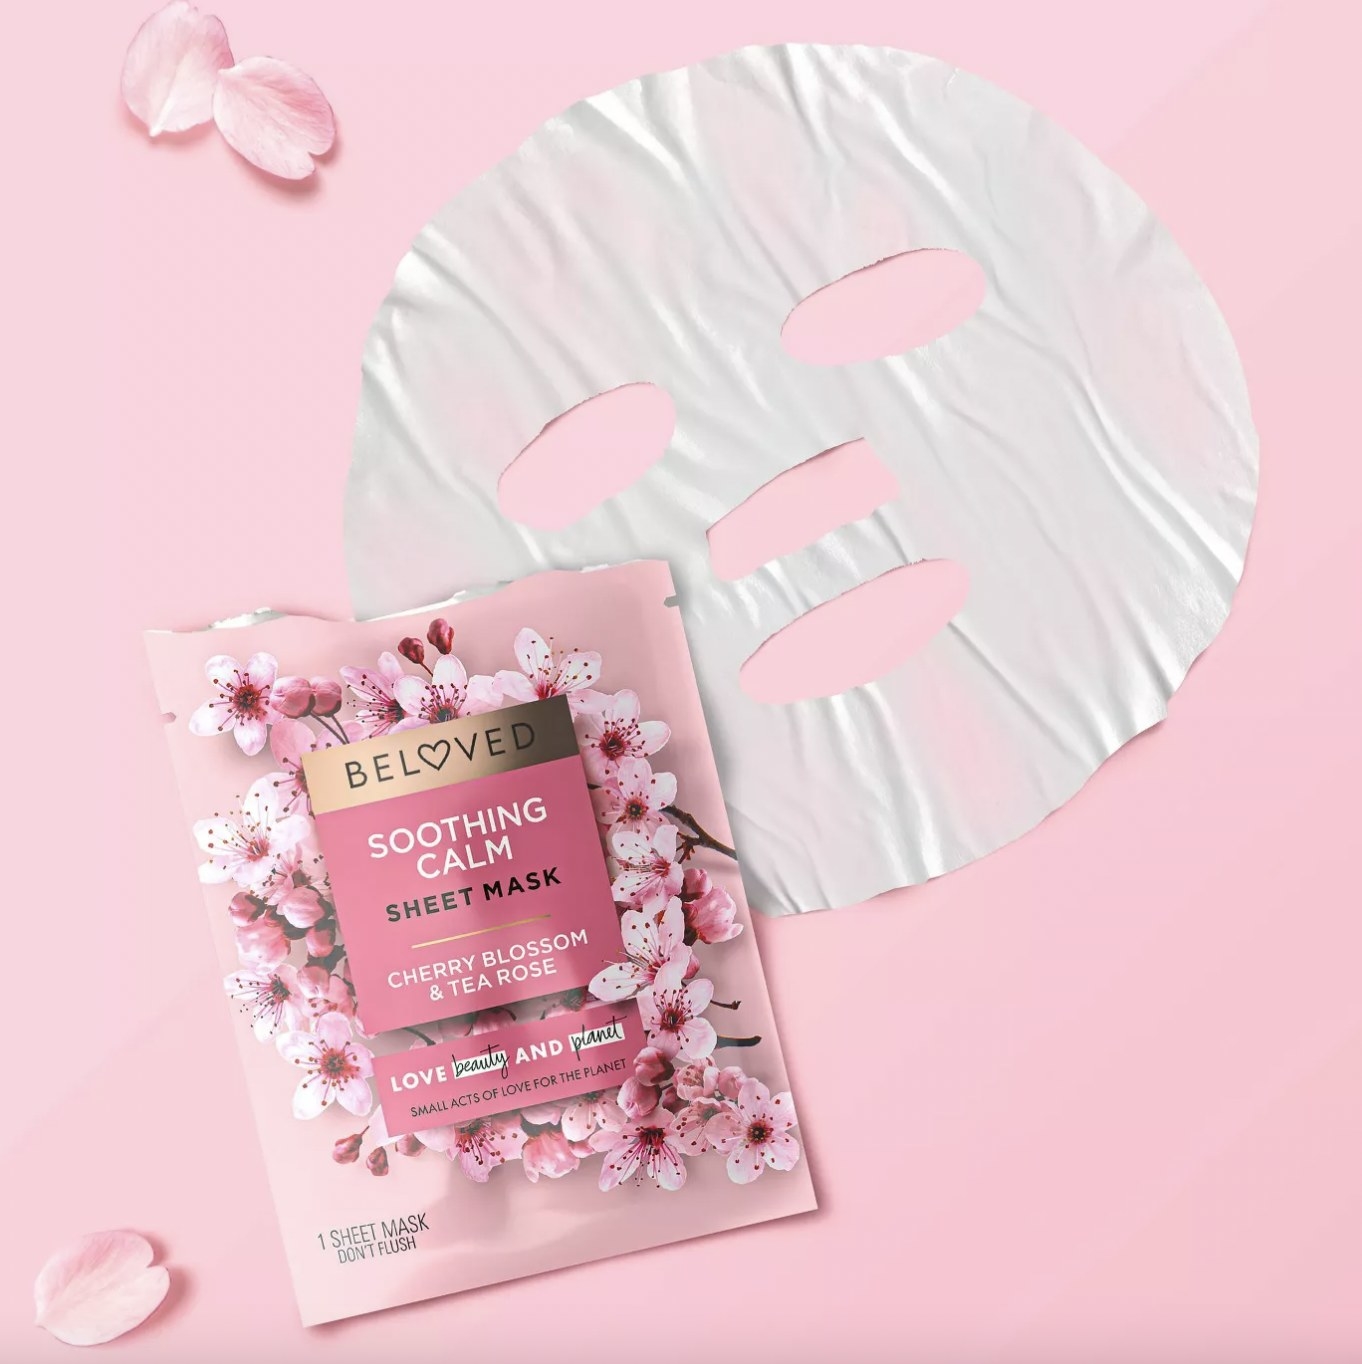 A package with a sheet mask